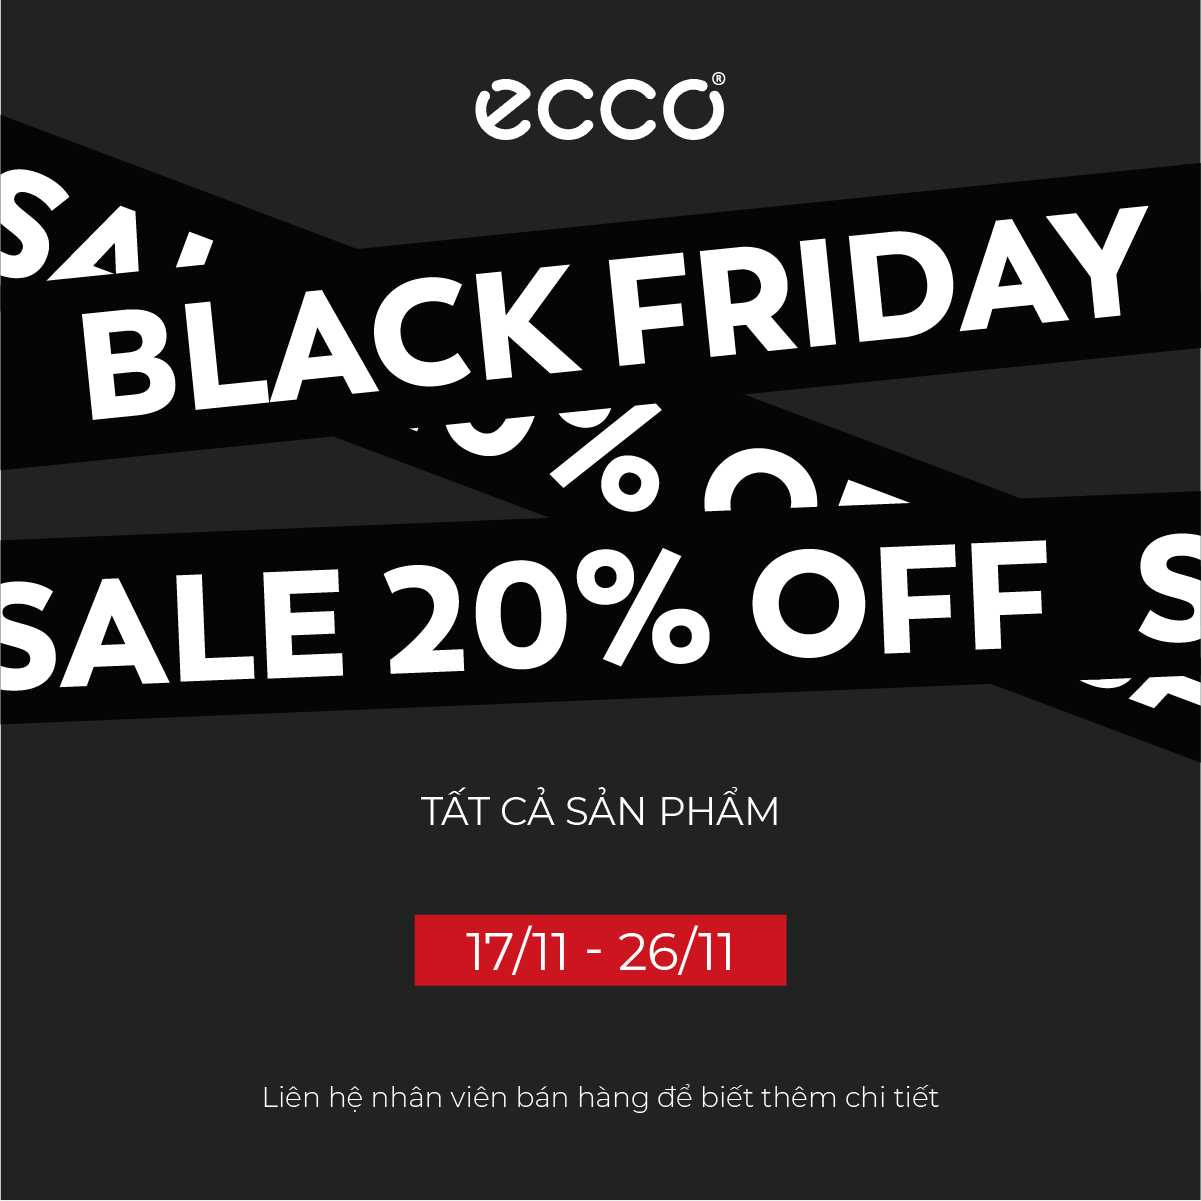 ECCO BLACK FRIDAY IS COMING - SALE 20% ALL ITEMS